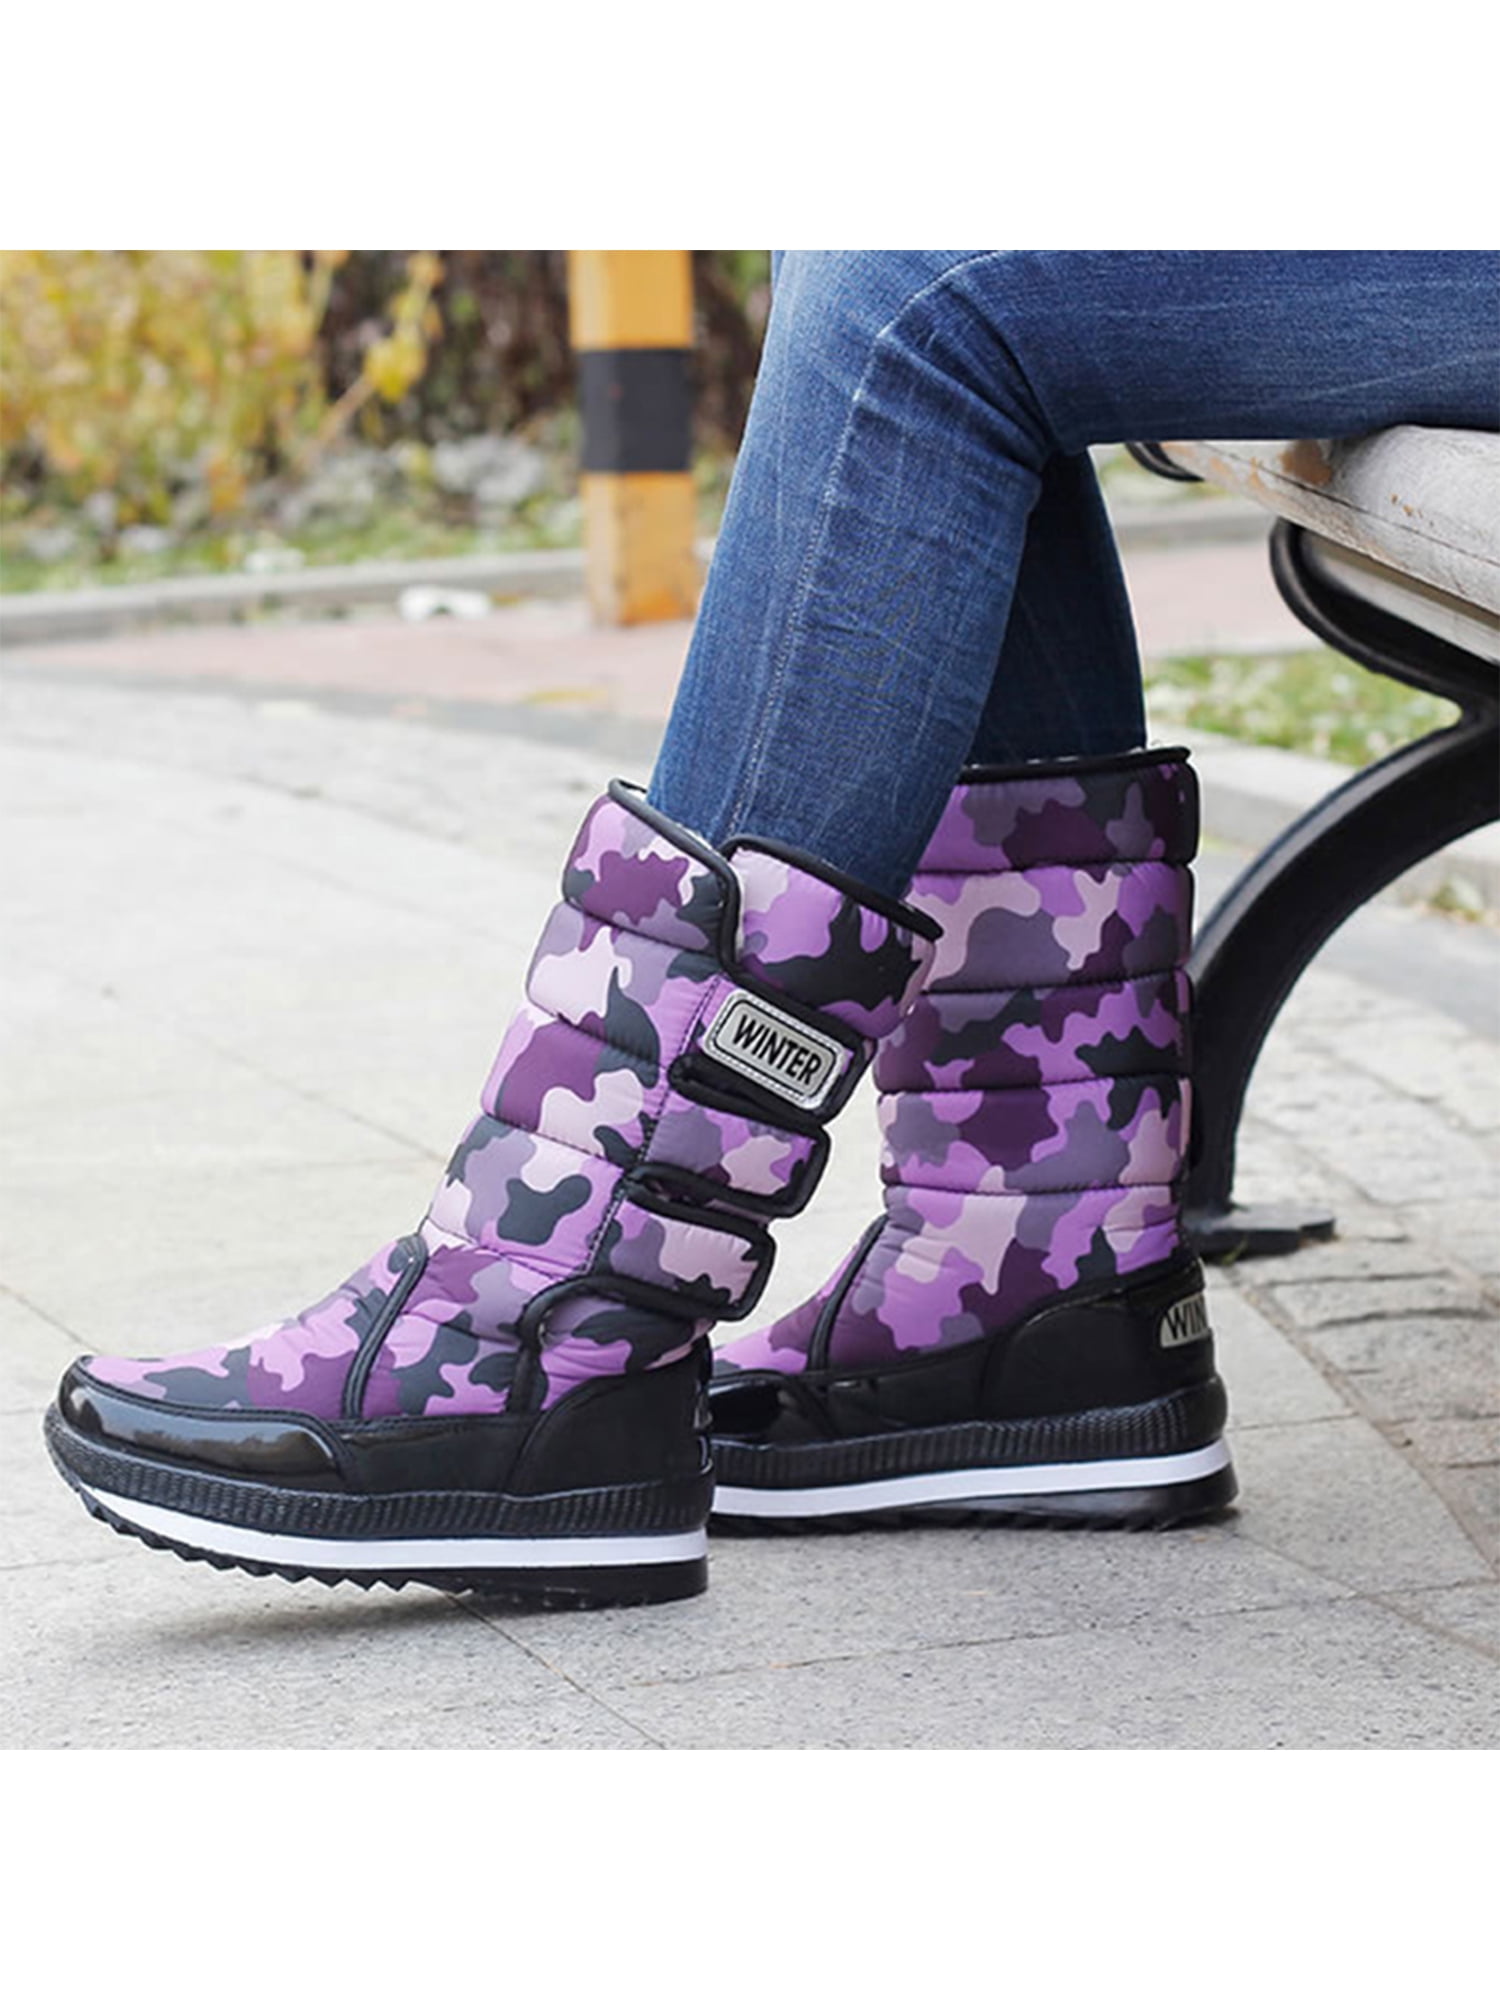 Purple Unisex Kids Youth Winter Snow Boots Water Resistant Round Toe Zipper and Toggle Fasten Shoes 